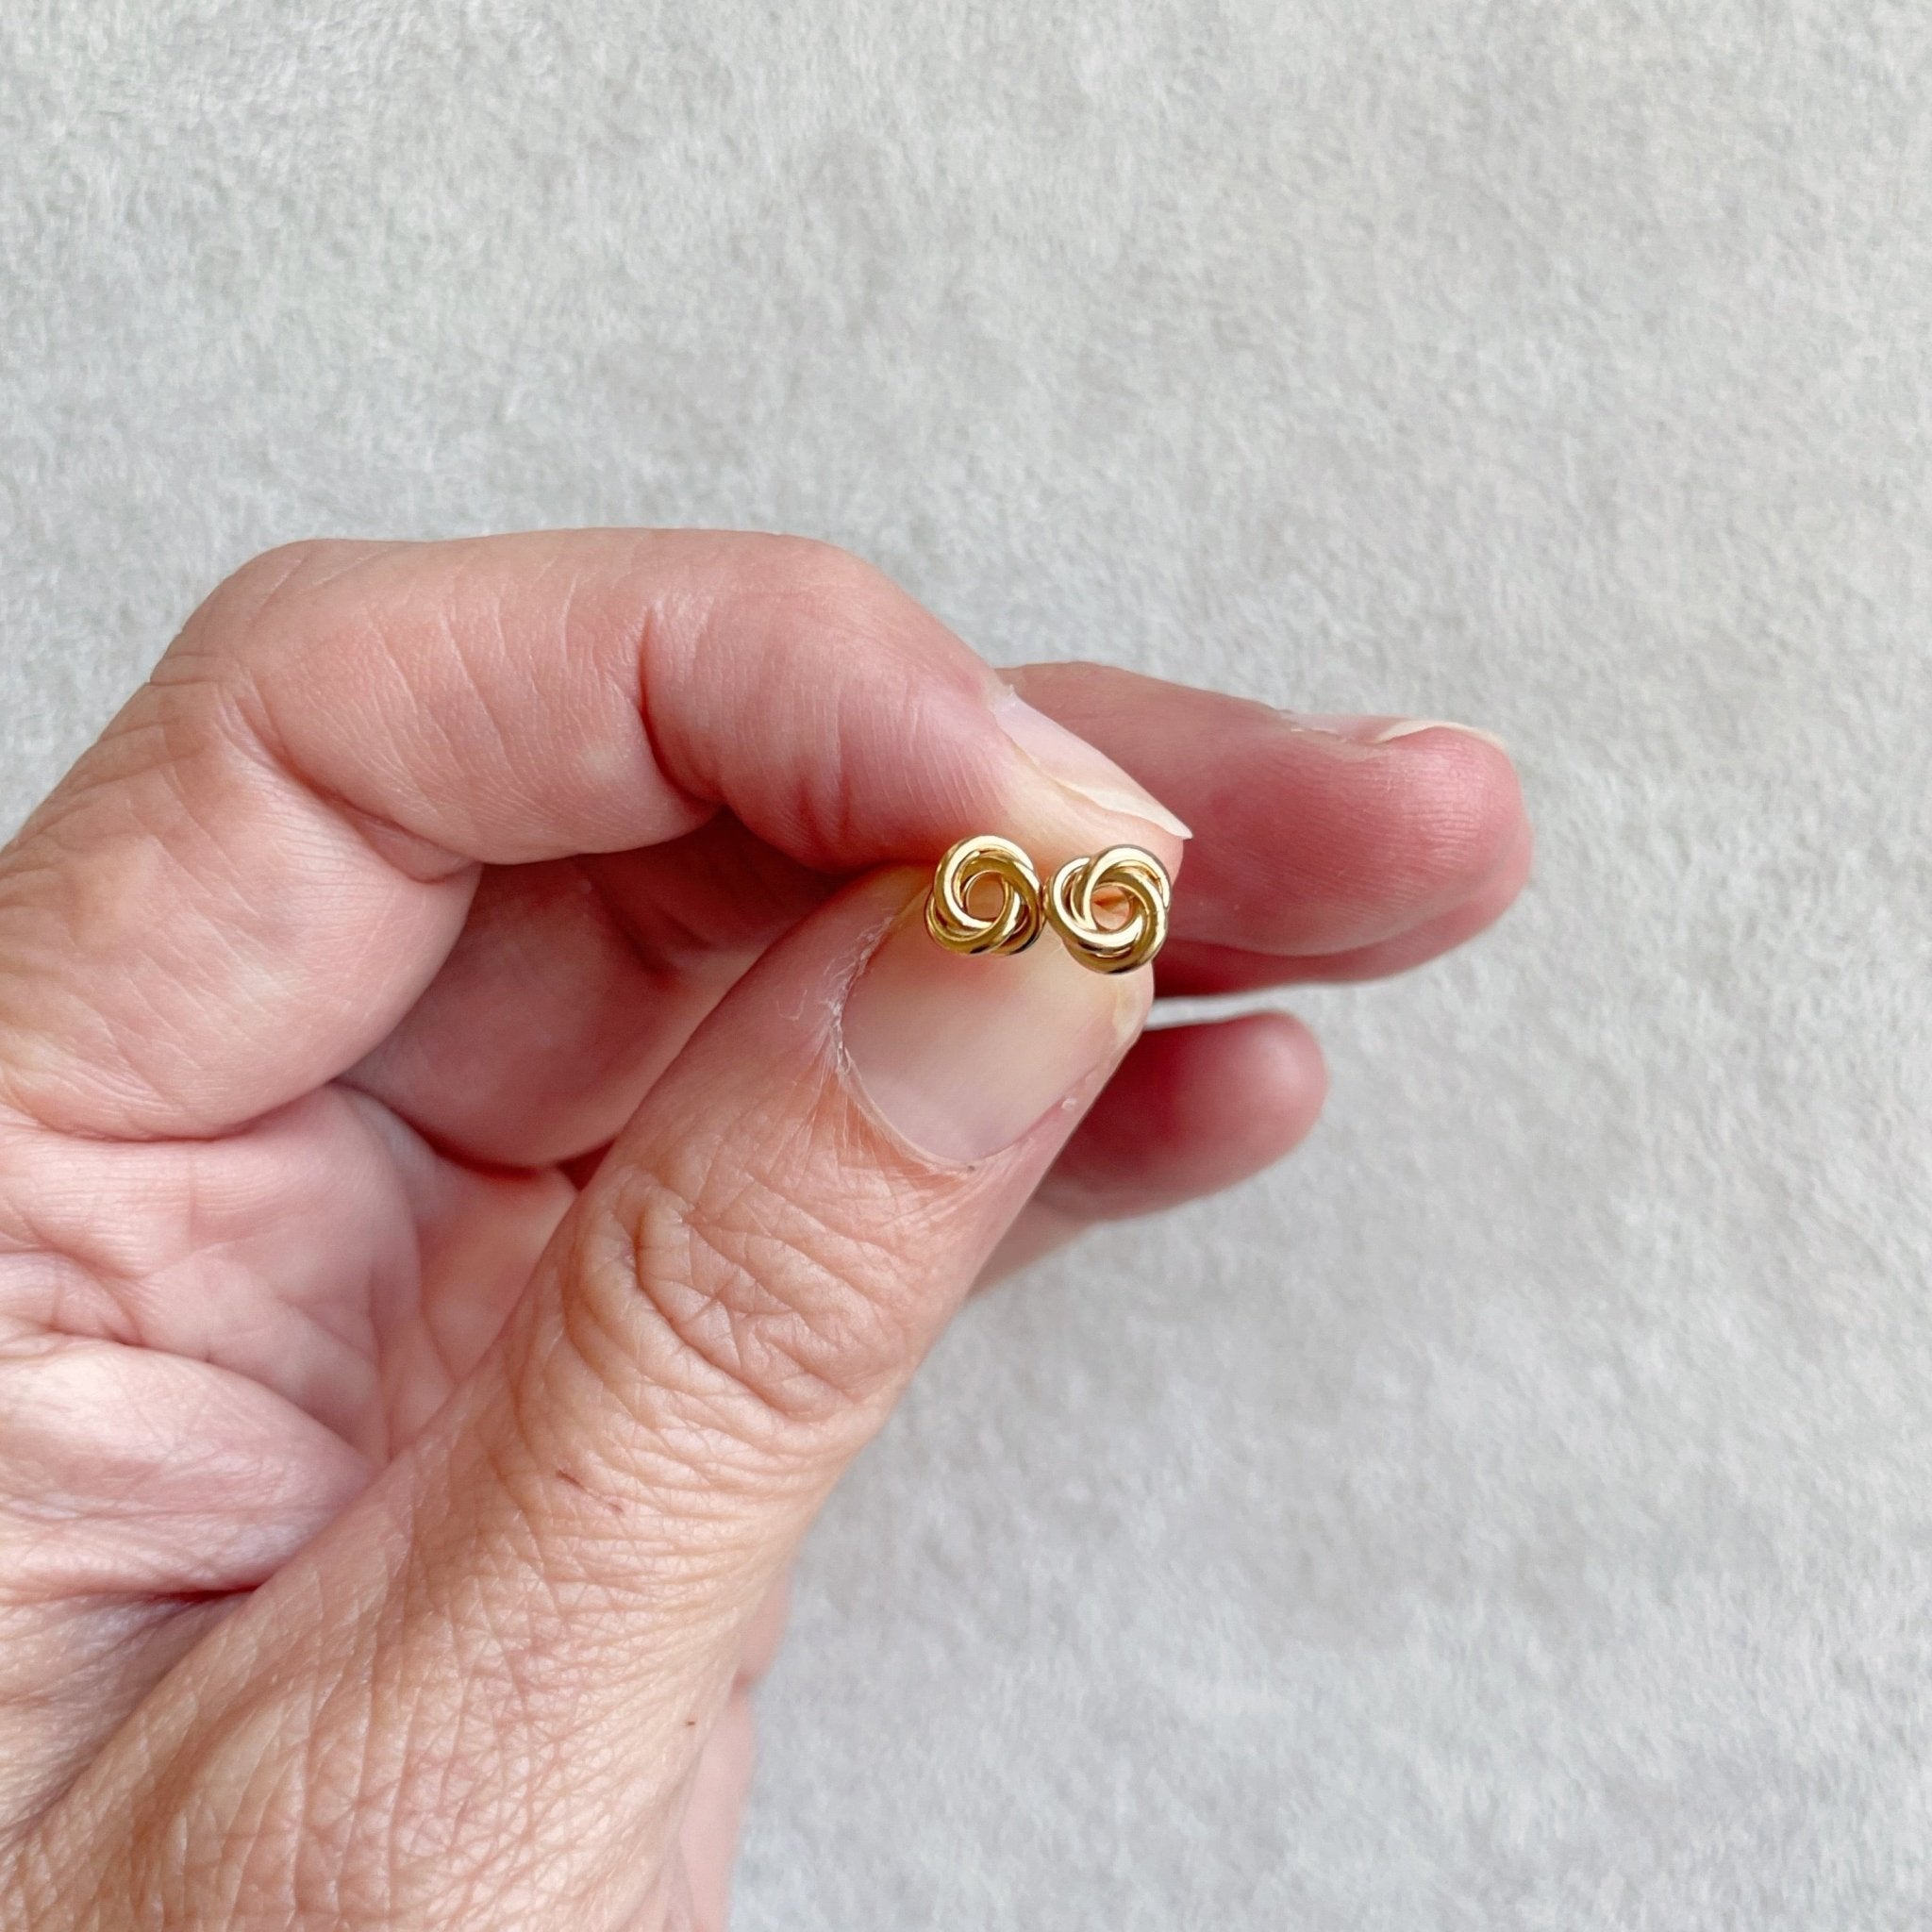 Hand holding 6 mm gold love knot stud earrings. Love Knot Studs by Sarah Cornwell Jewelry